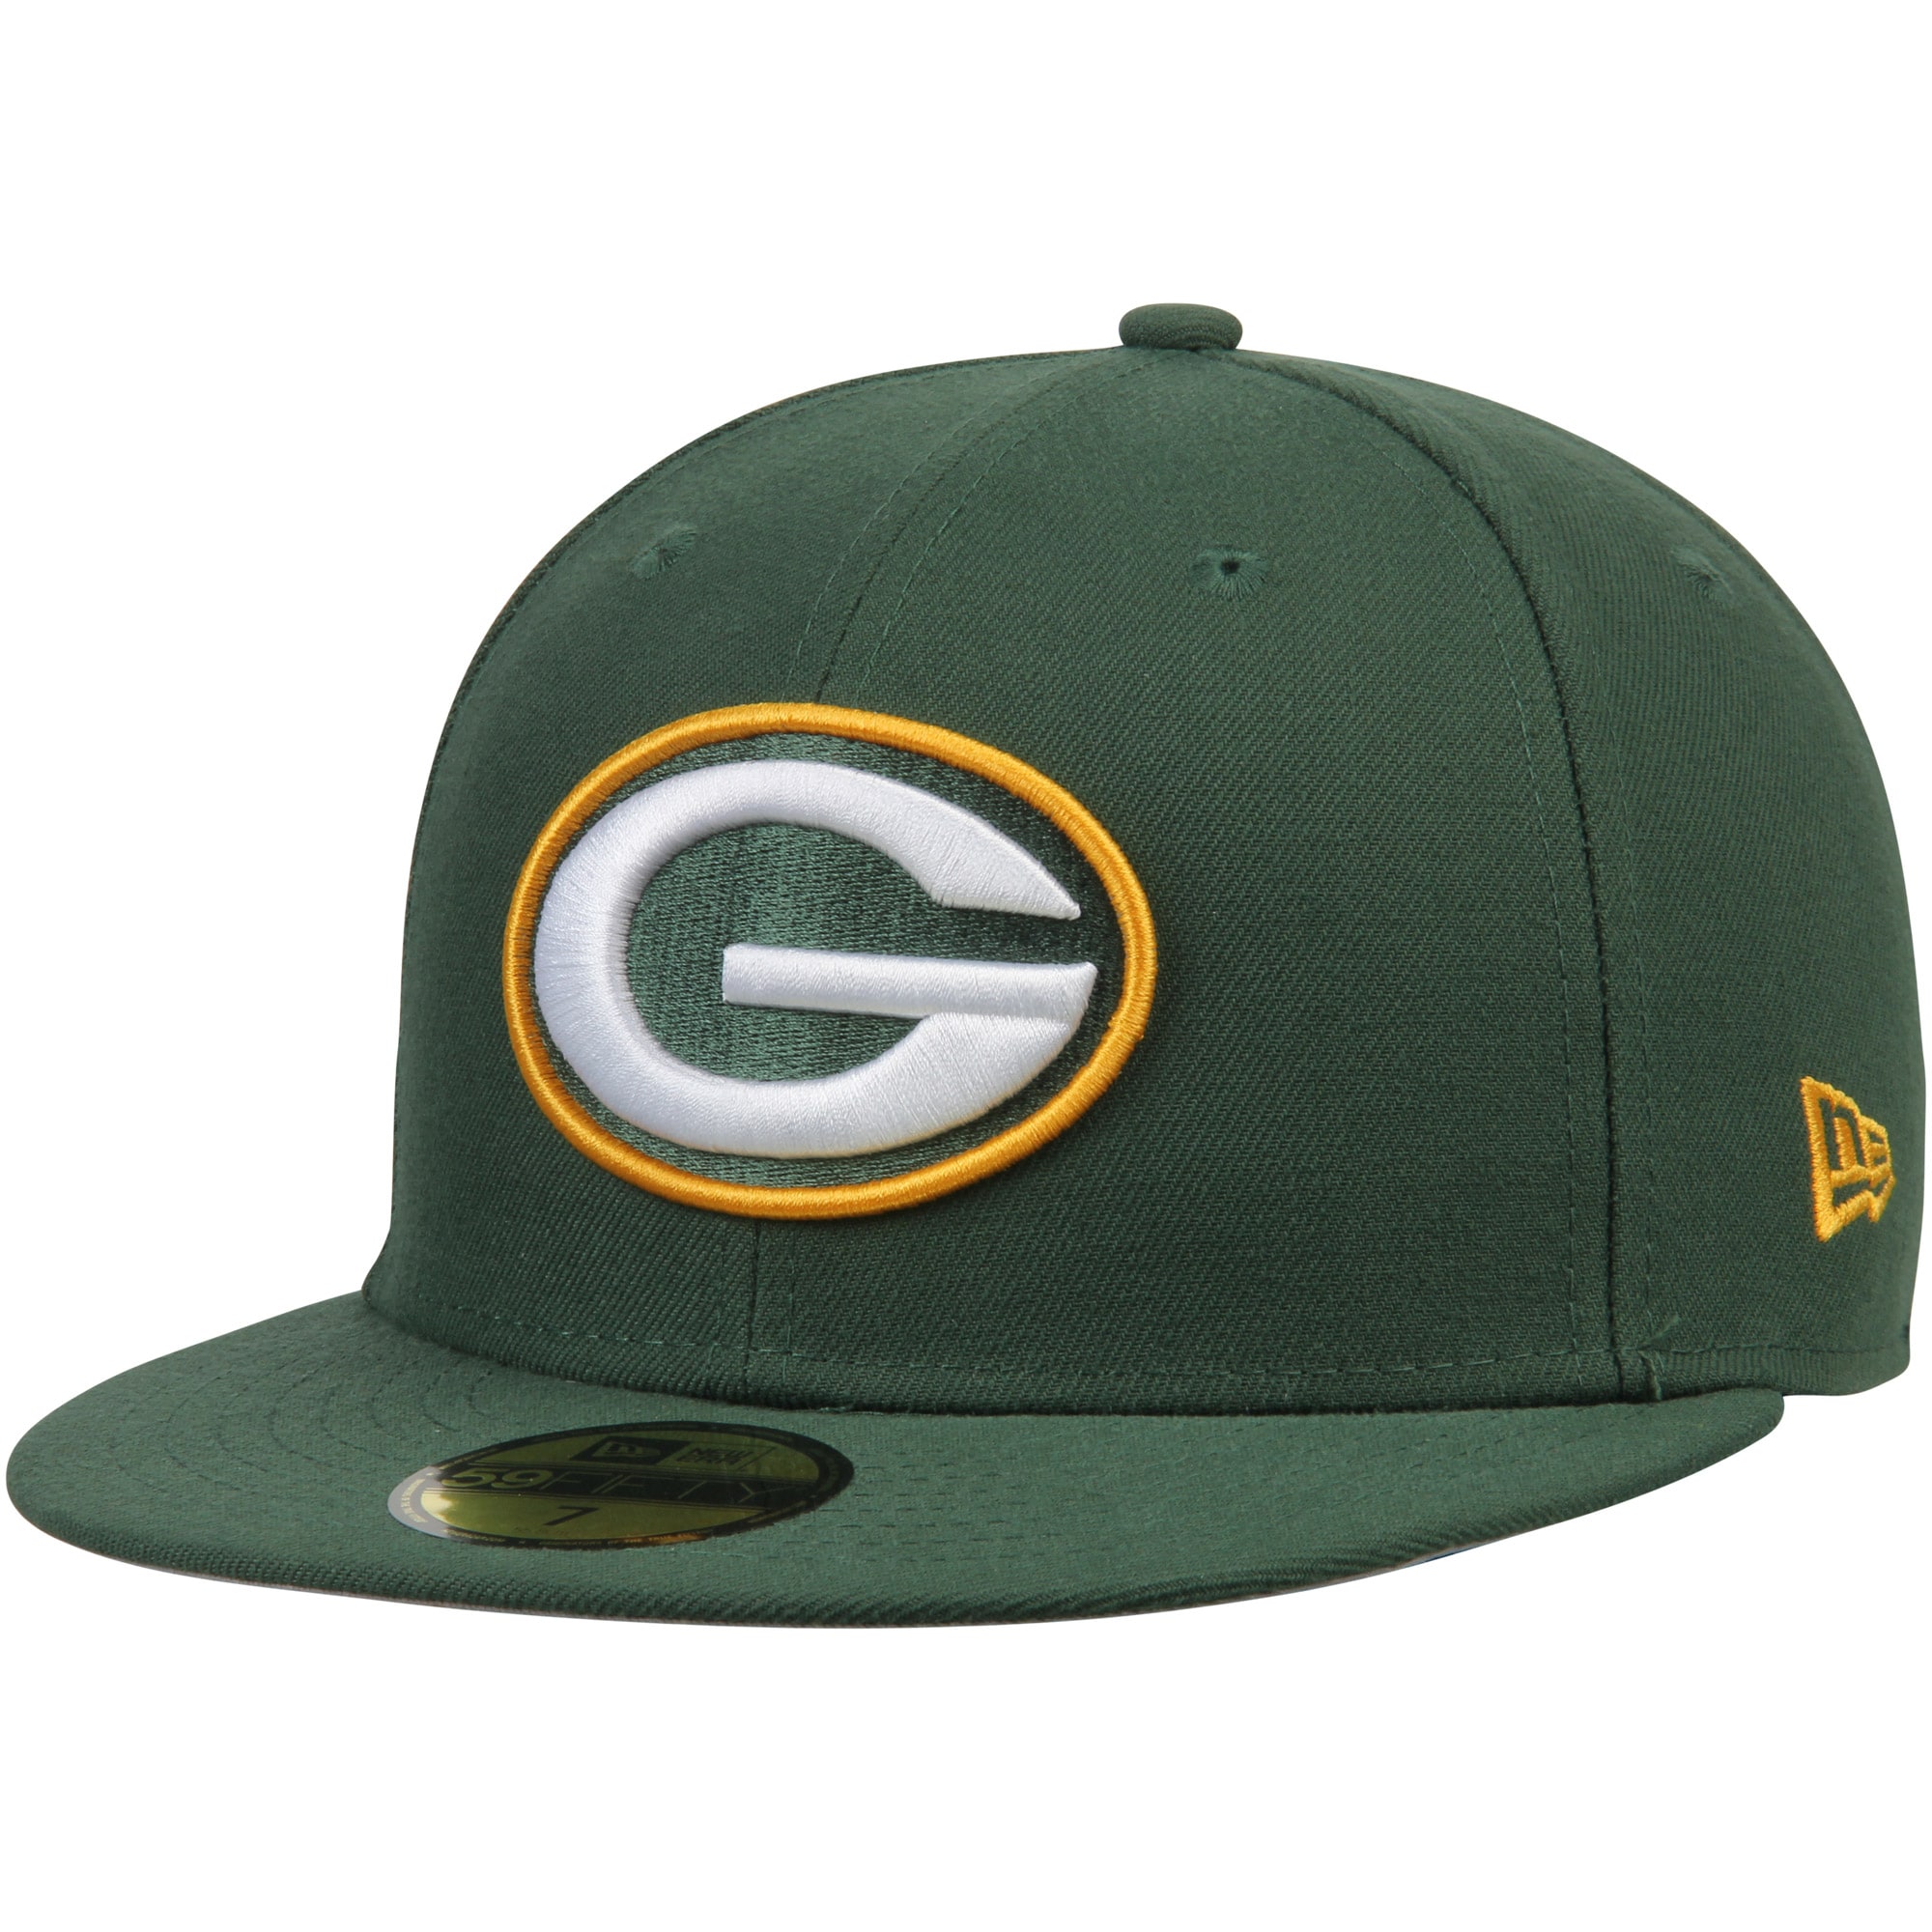 Men's New Era Green Green Bay Packers Omaha 59FIFTY Fitted Hat - image 1 of 4